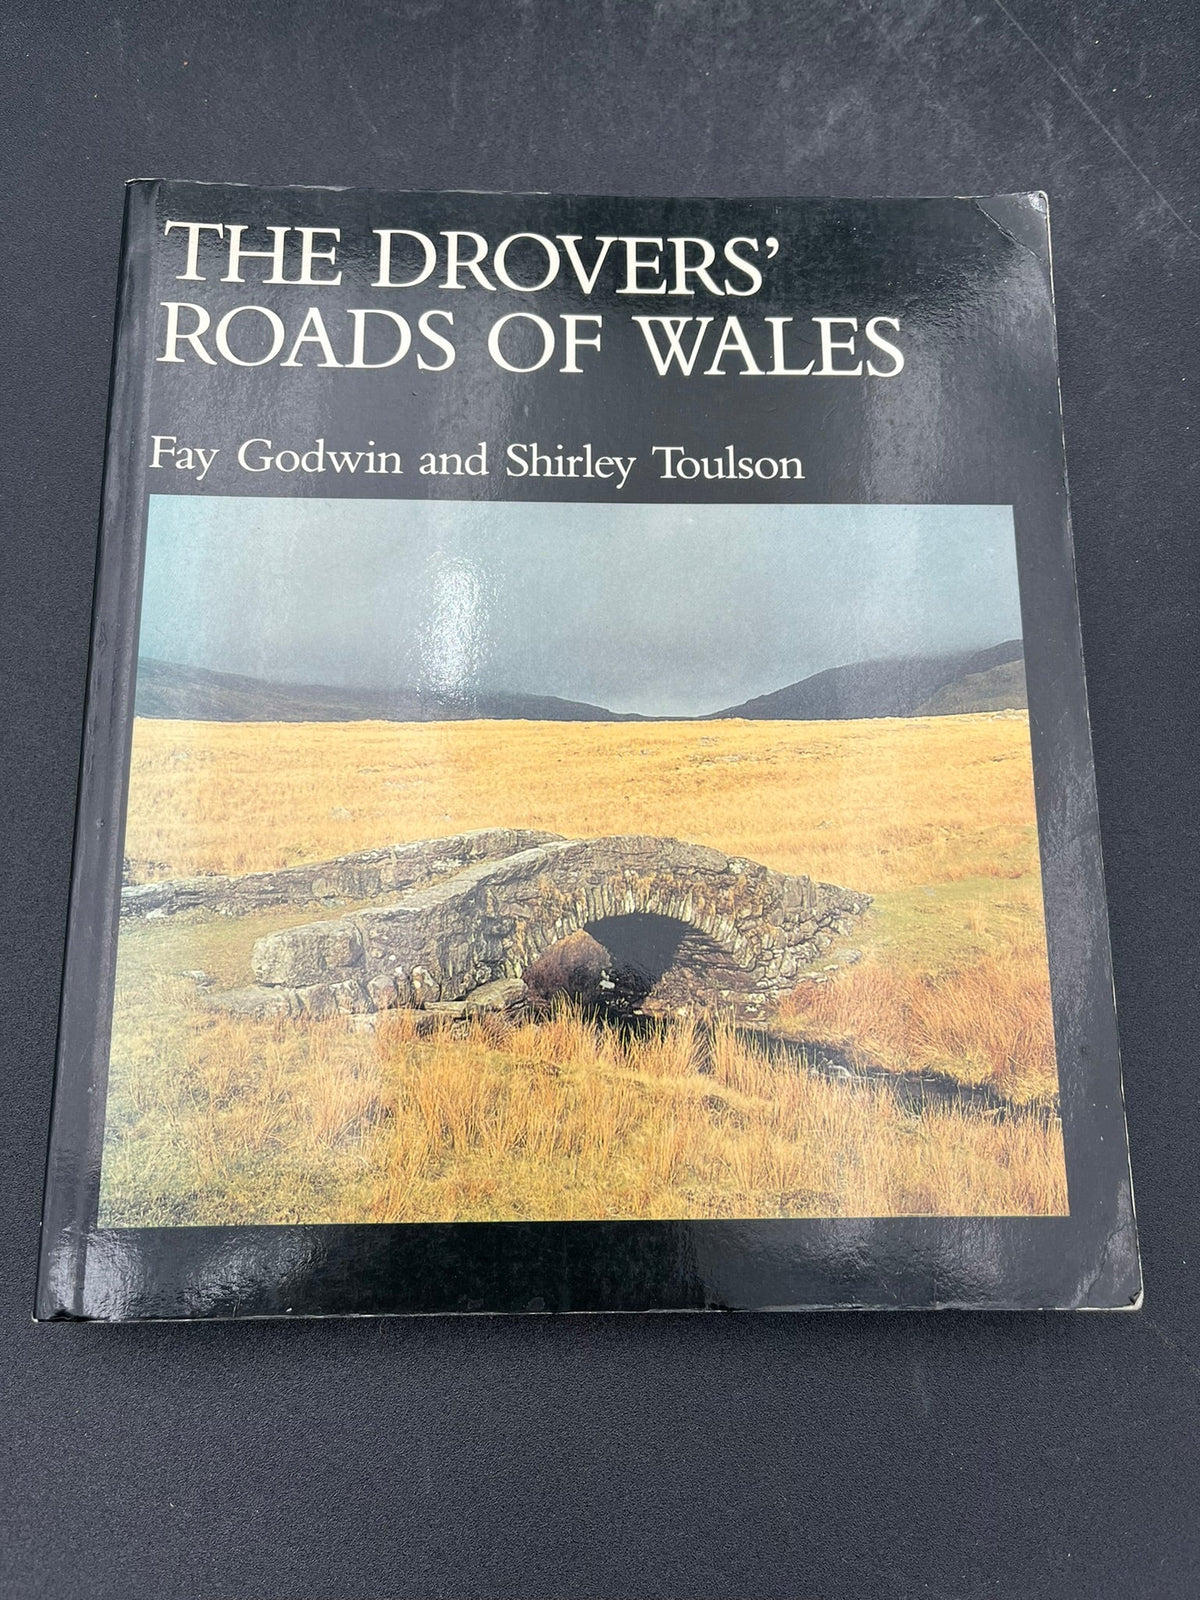 The Drovers' Roads of Wales